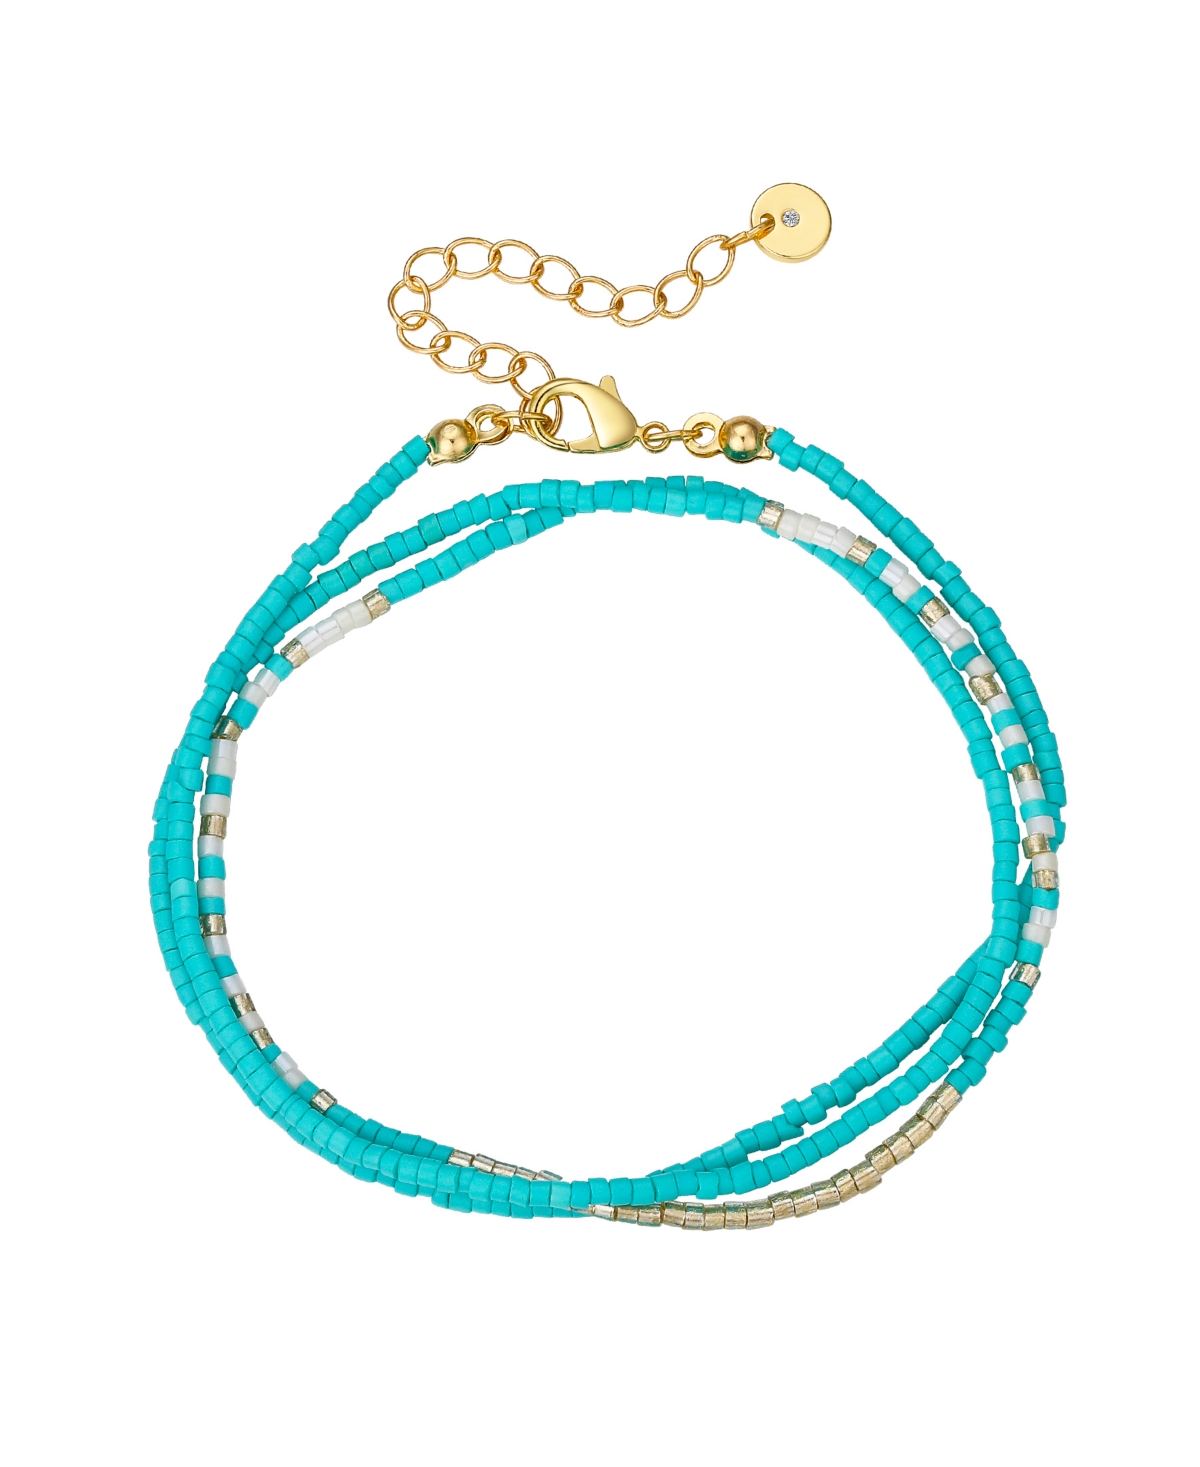 Unwritten Turquoise And White Beads Wrap Bracelet Or Necklace In Gold